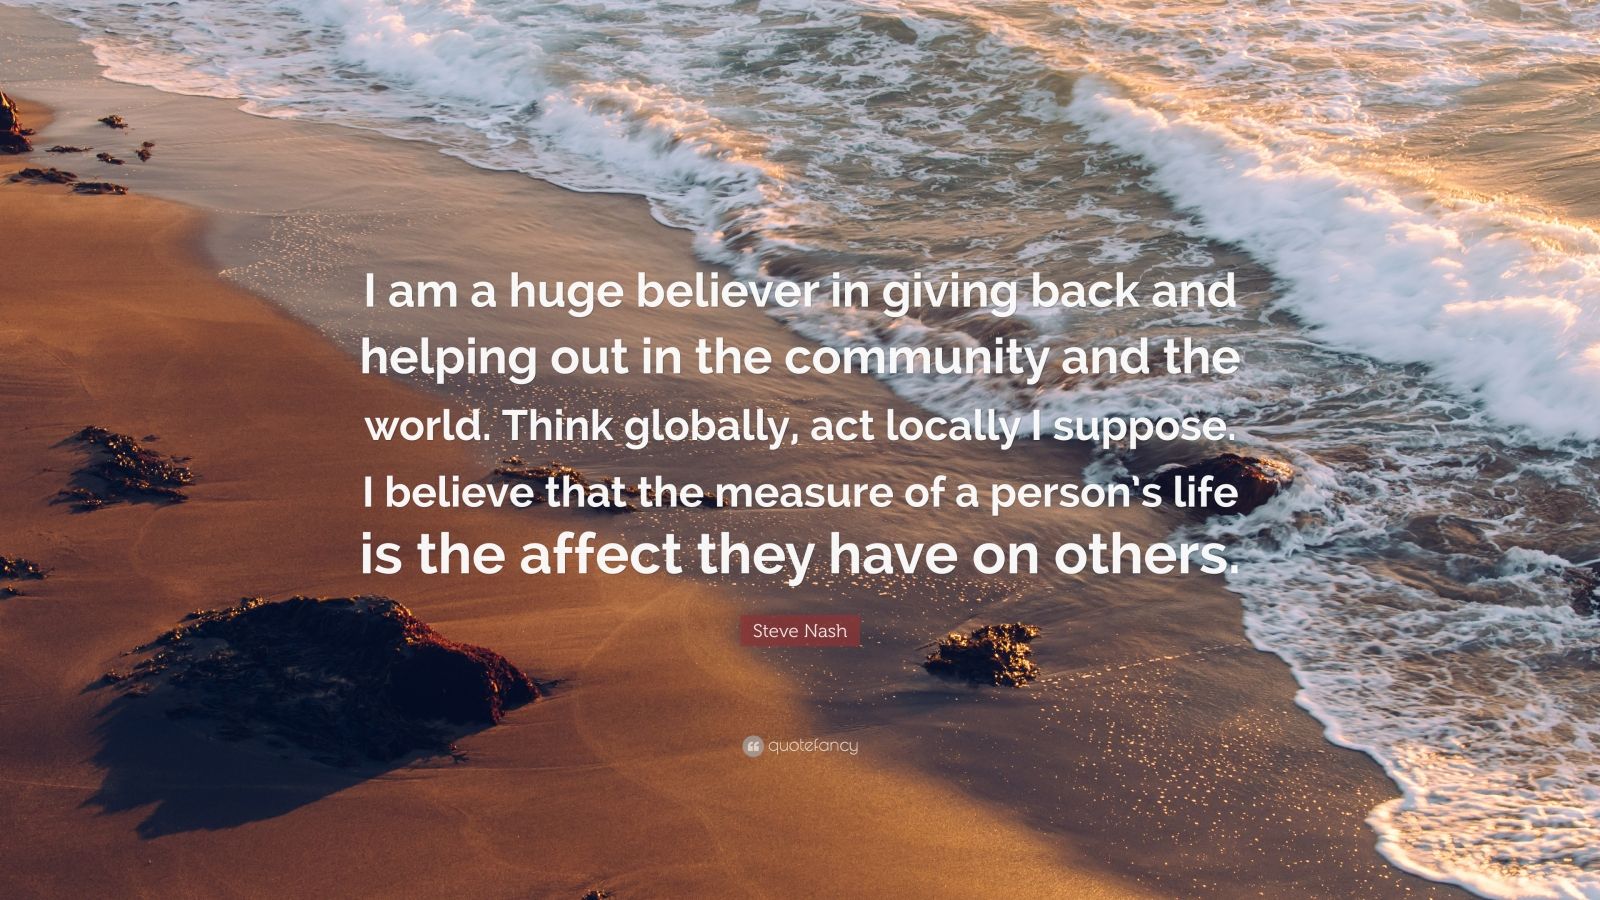 Steve Nash Quote: “I am a huge believer in giving back and helping out ...